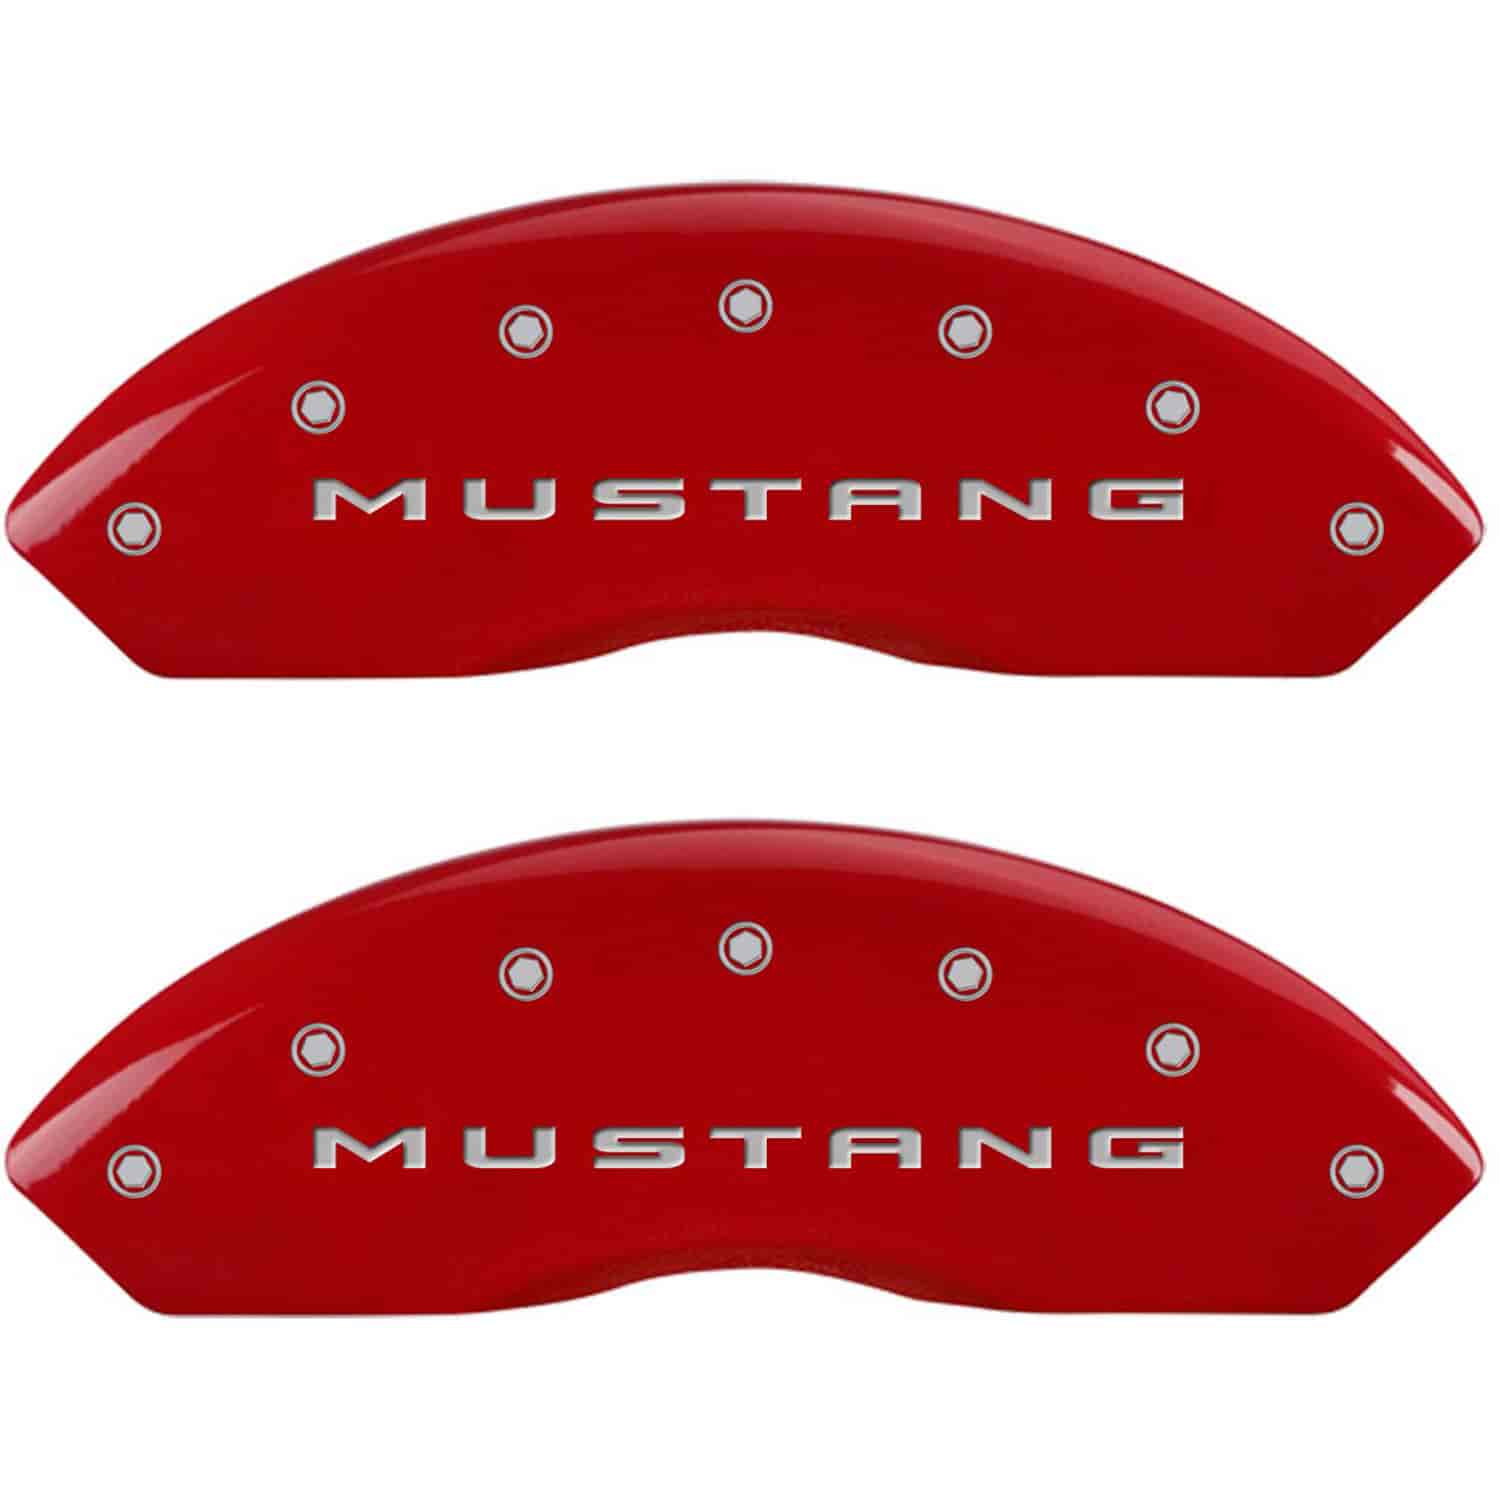 Set of 4 caliper covers Engraved Front 2015/Mustang - Engraved Rear 2015/Bar & Pony Red powder coat finish silver characters.